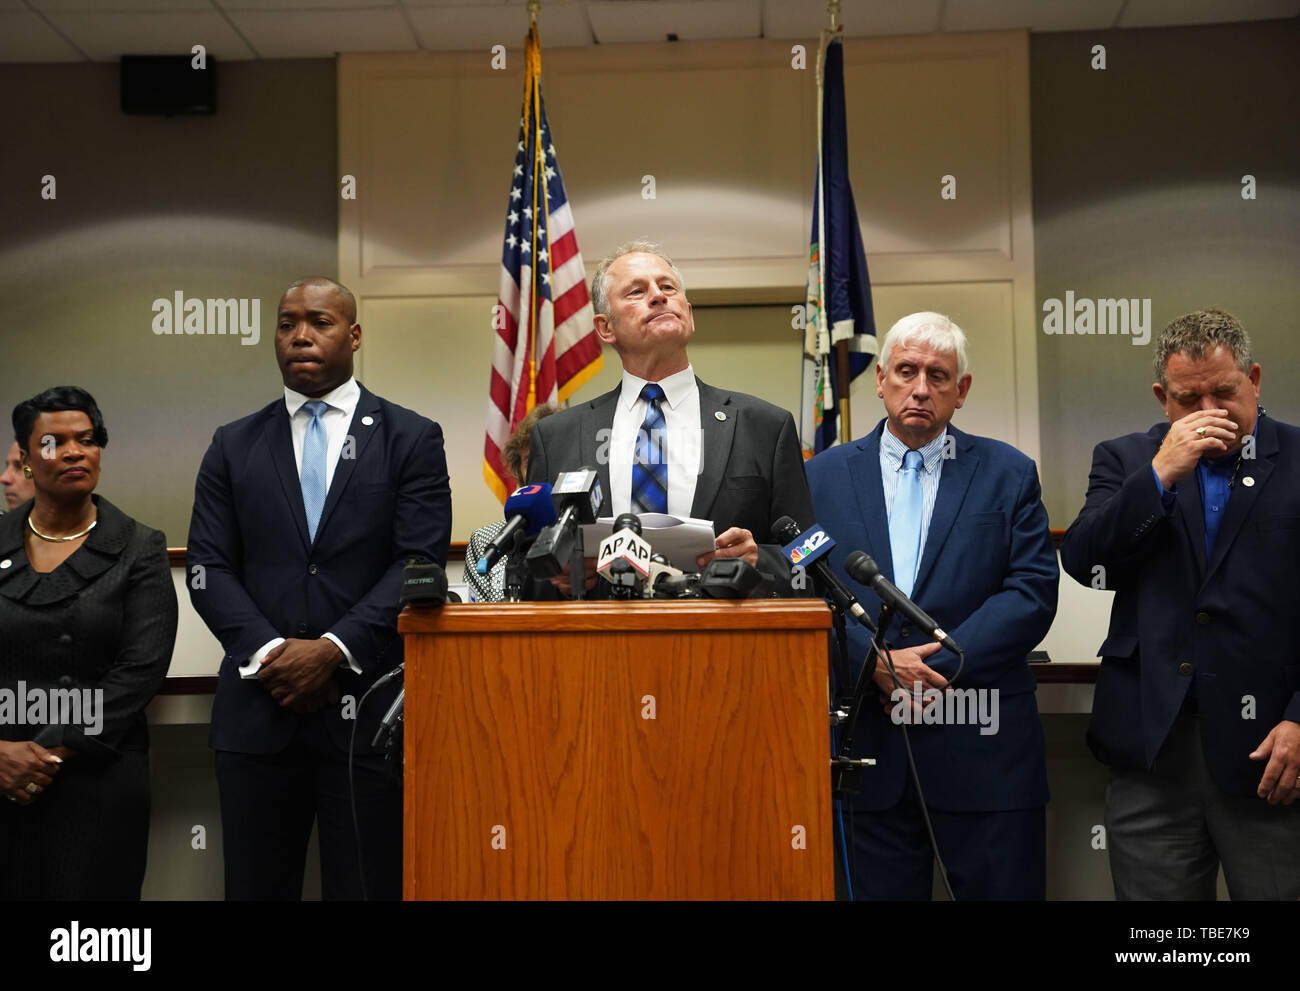 Virginia Beach, USA. 1st June, 2019. Virginia Beach City Manager Dave Hansen (C) speaks during a press conference in Virginia Beach, Virginia, the United States, on June 1, 2019. The shooter who killed 12 people in a mass shooting in Virginia Beach, in the eastern U.S. state of Virginia, on Friday, has been identified as DeWayne Craddock, a 15-year city employee, local police said on Saturday. Credit: Liu Jie/Xinhua/Alamy Live News Stock Photo